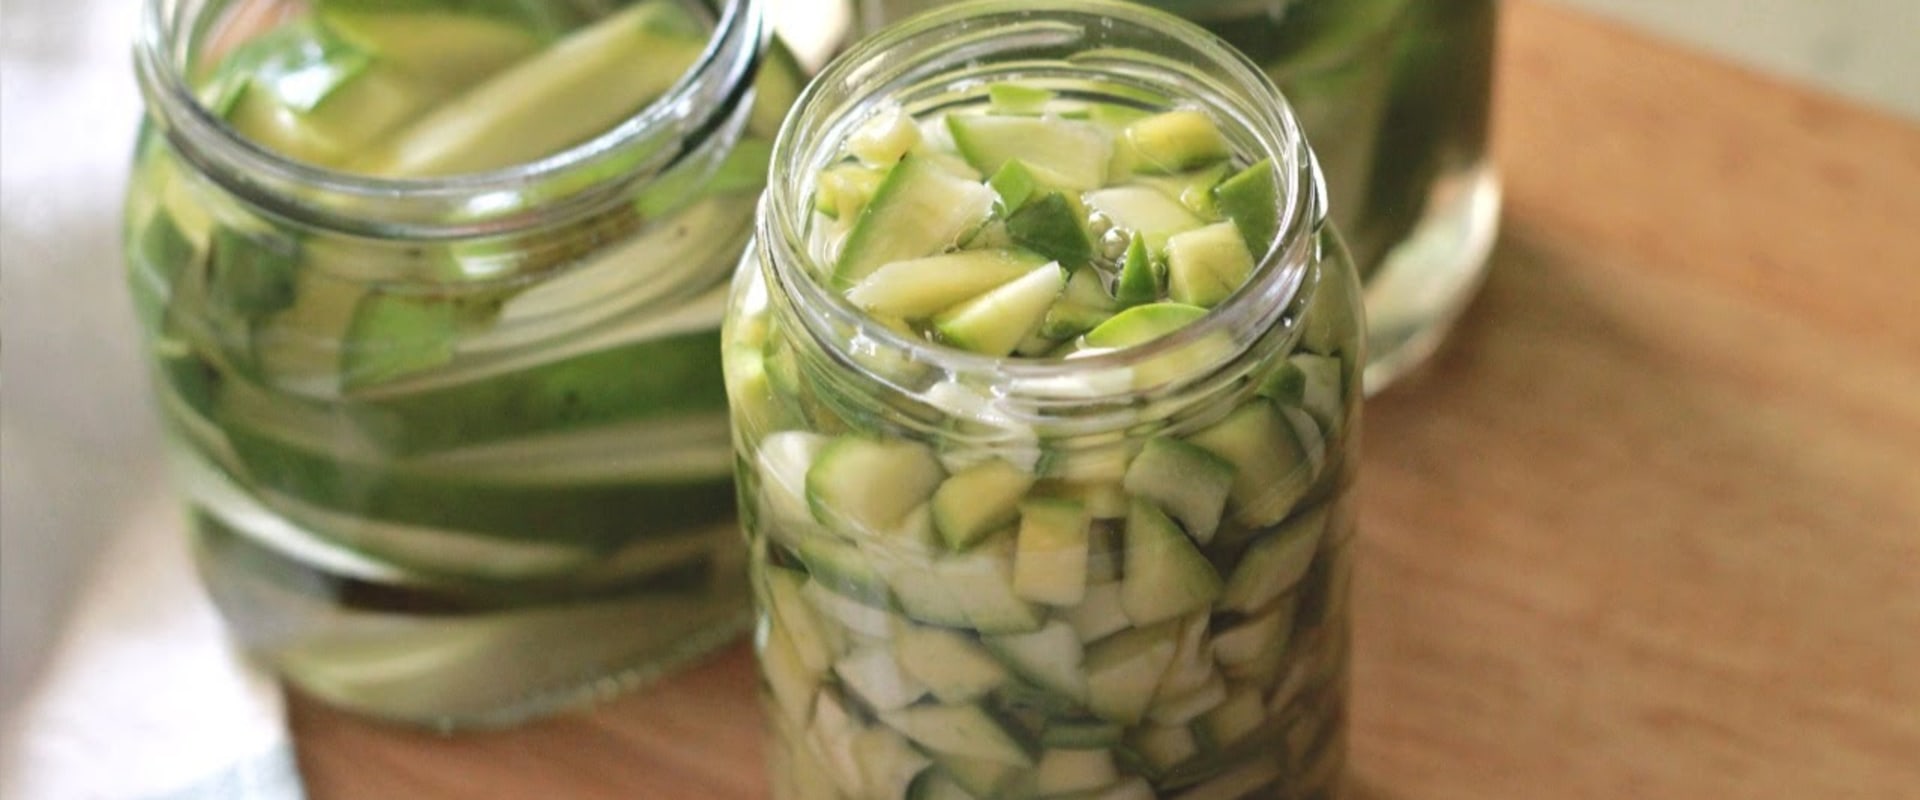 Creative Ways to Use Pickles Made from Whole Raw Mangoes